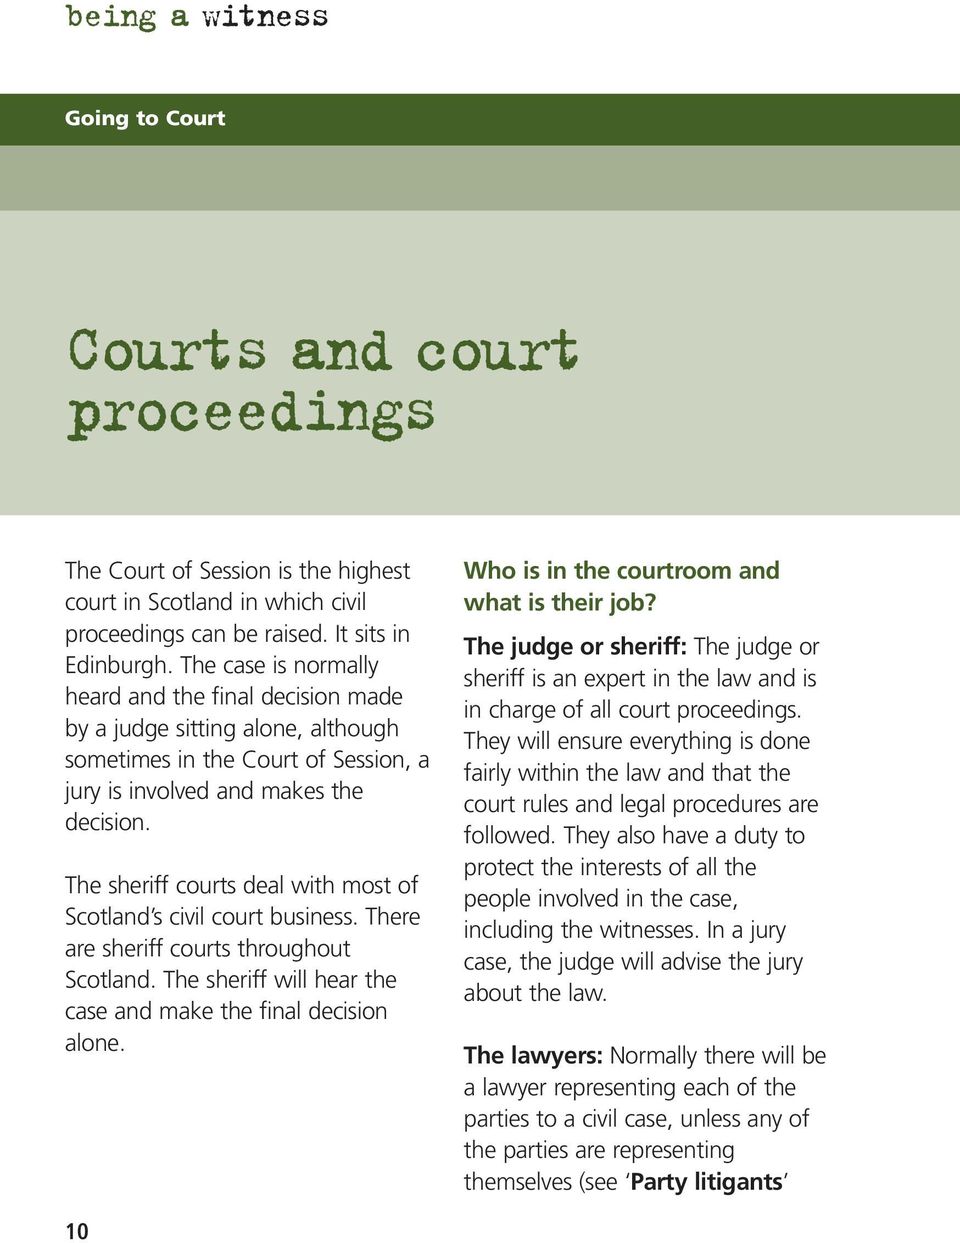 The sheriff courts deal with most of Scotland s civil court business. There are sheriff courts throughout Scotland. The sheriff will hear the case and make the final decision alone.